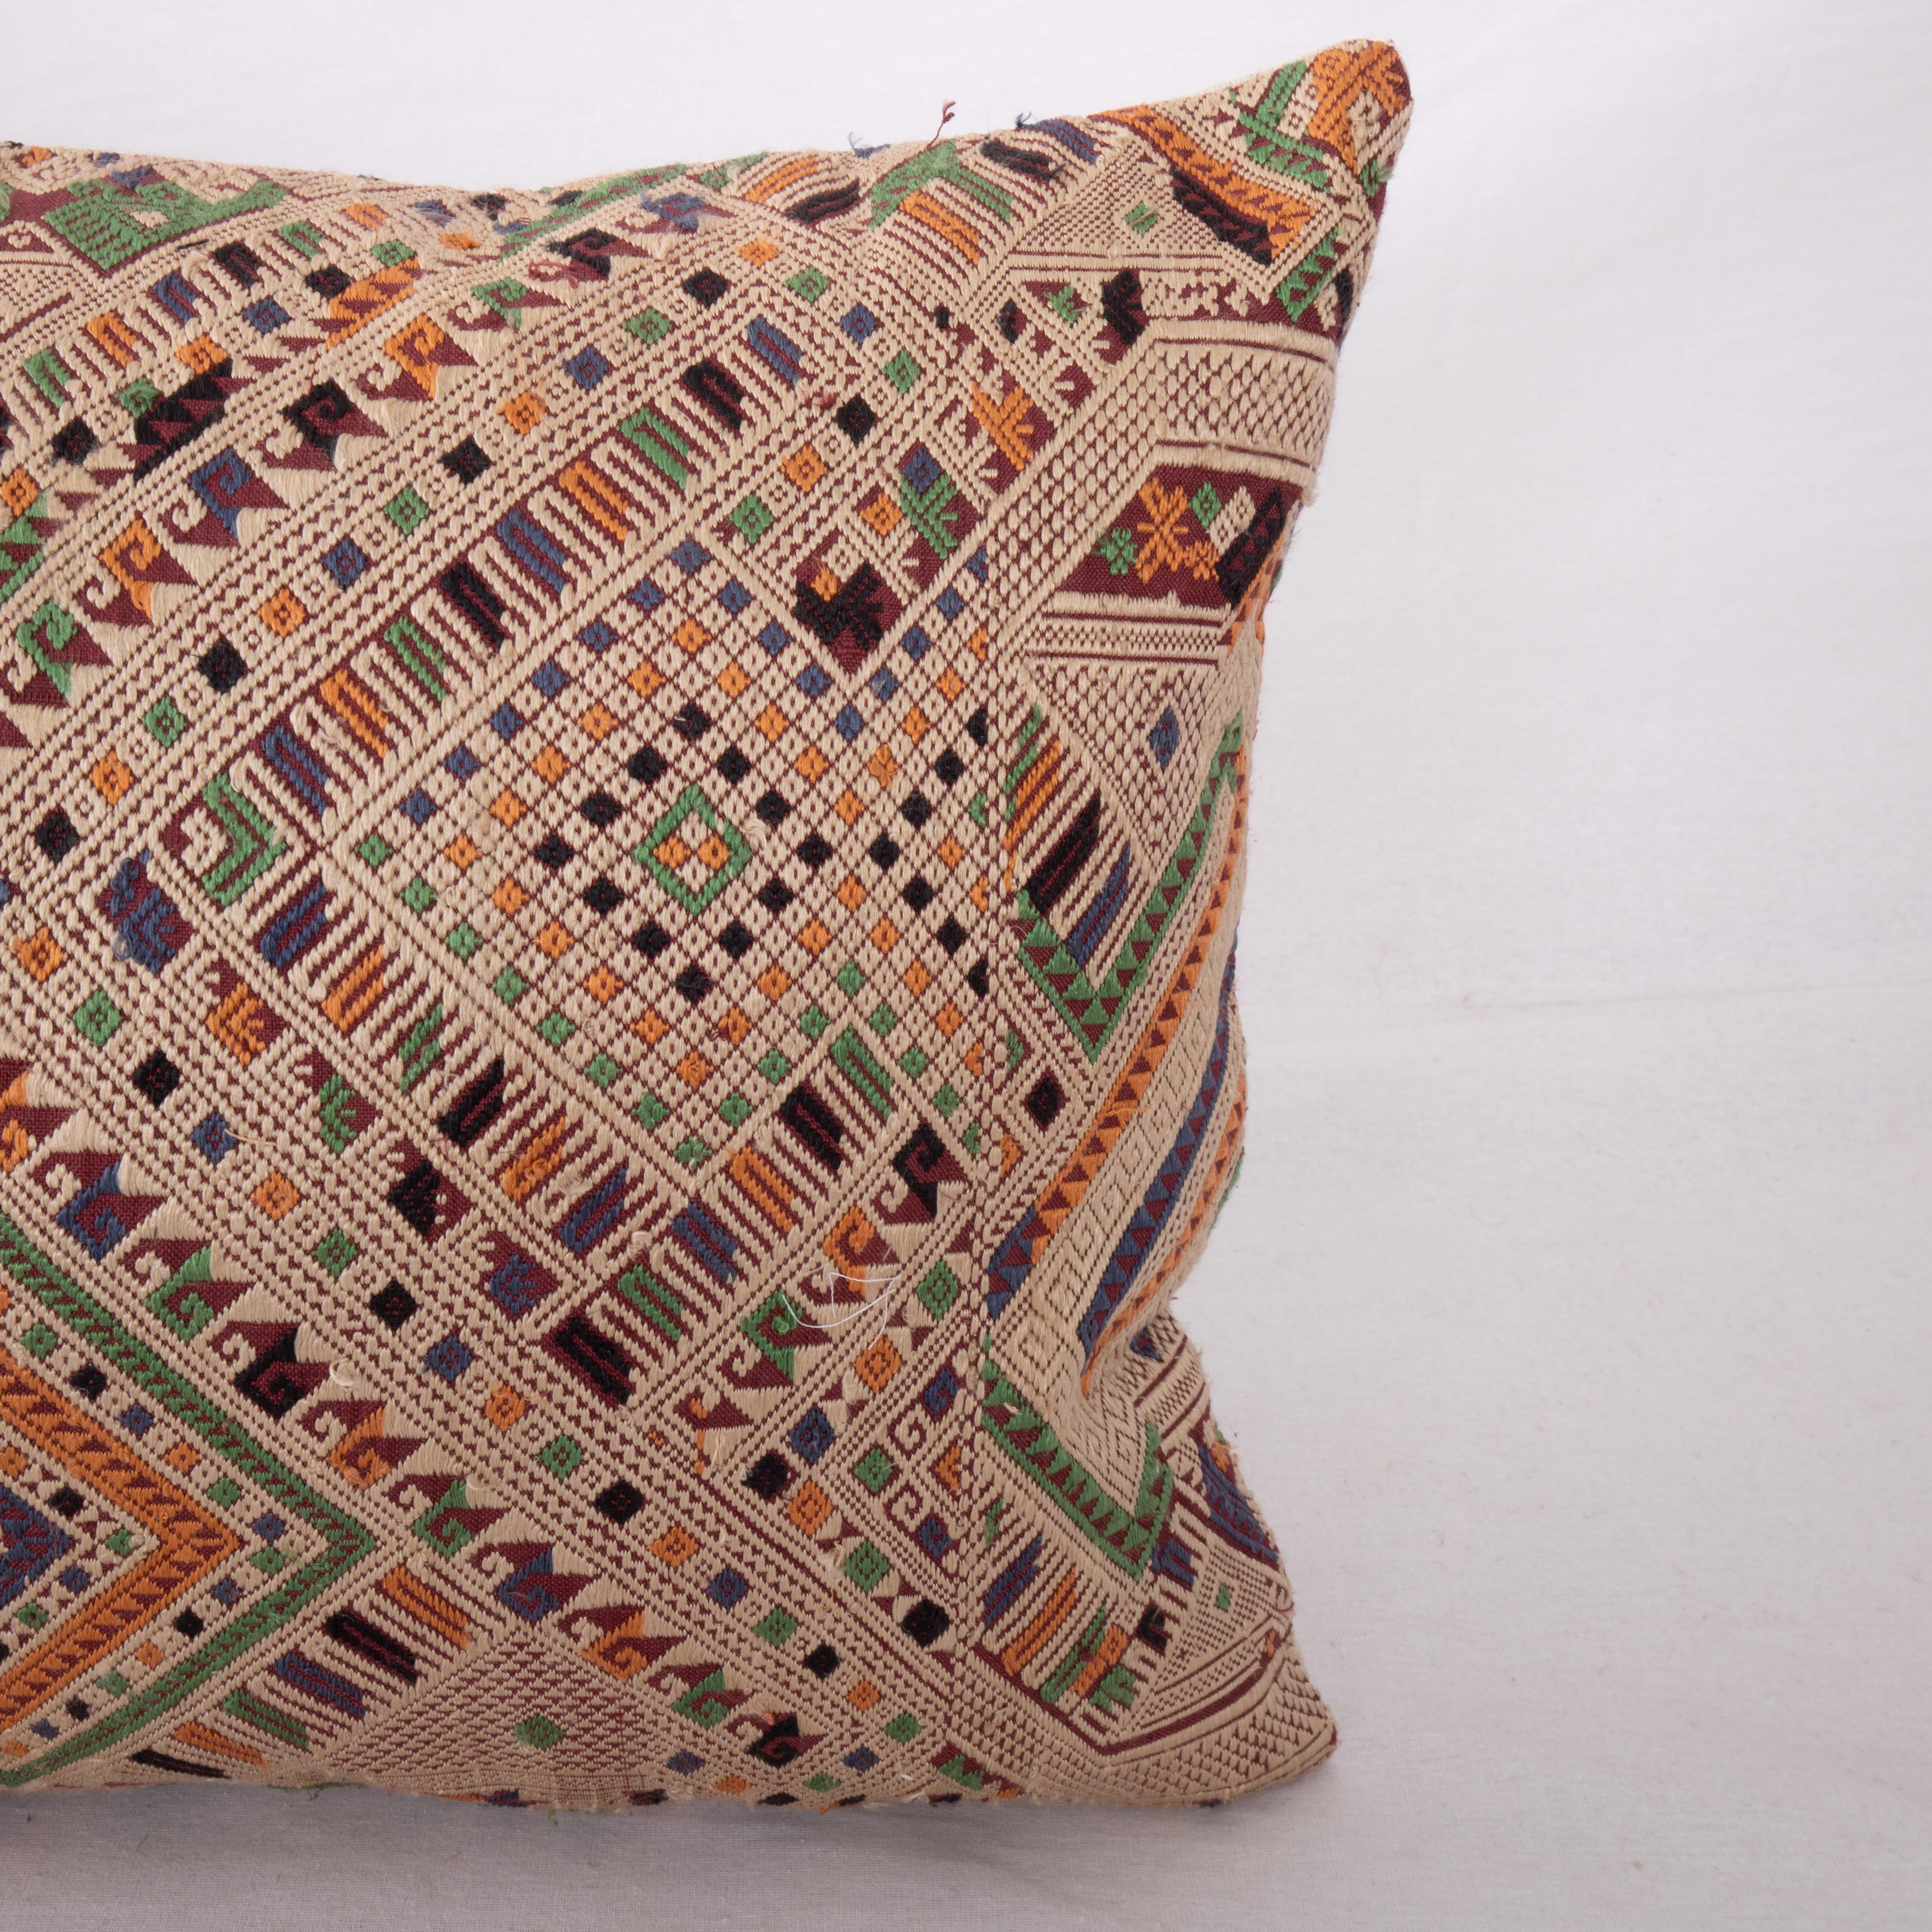 Embroidered Pillow Cover Made from a Laotian Vintage Silk Embroidery For Sale